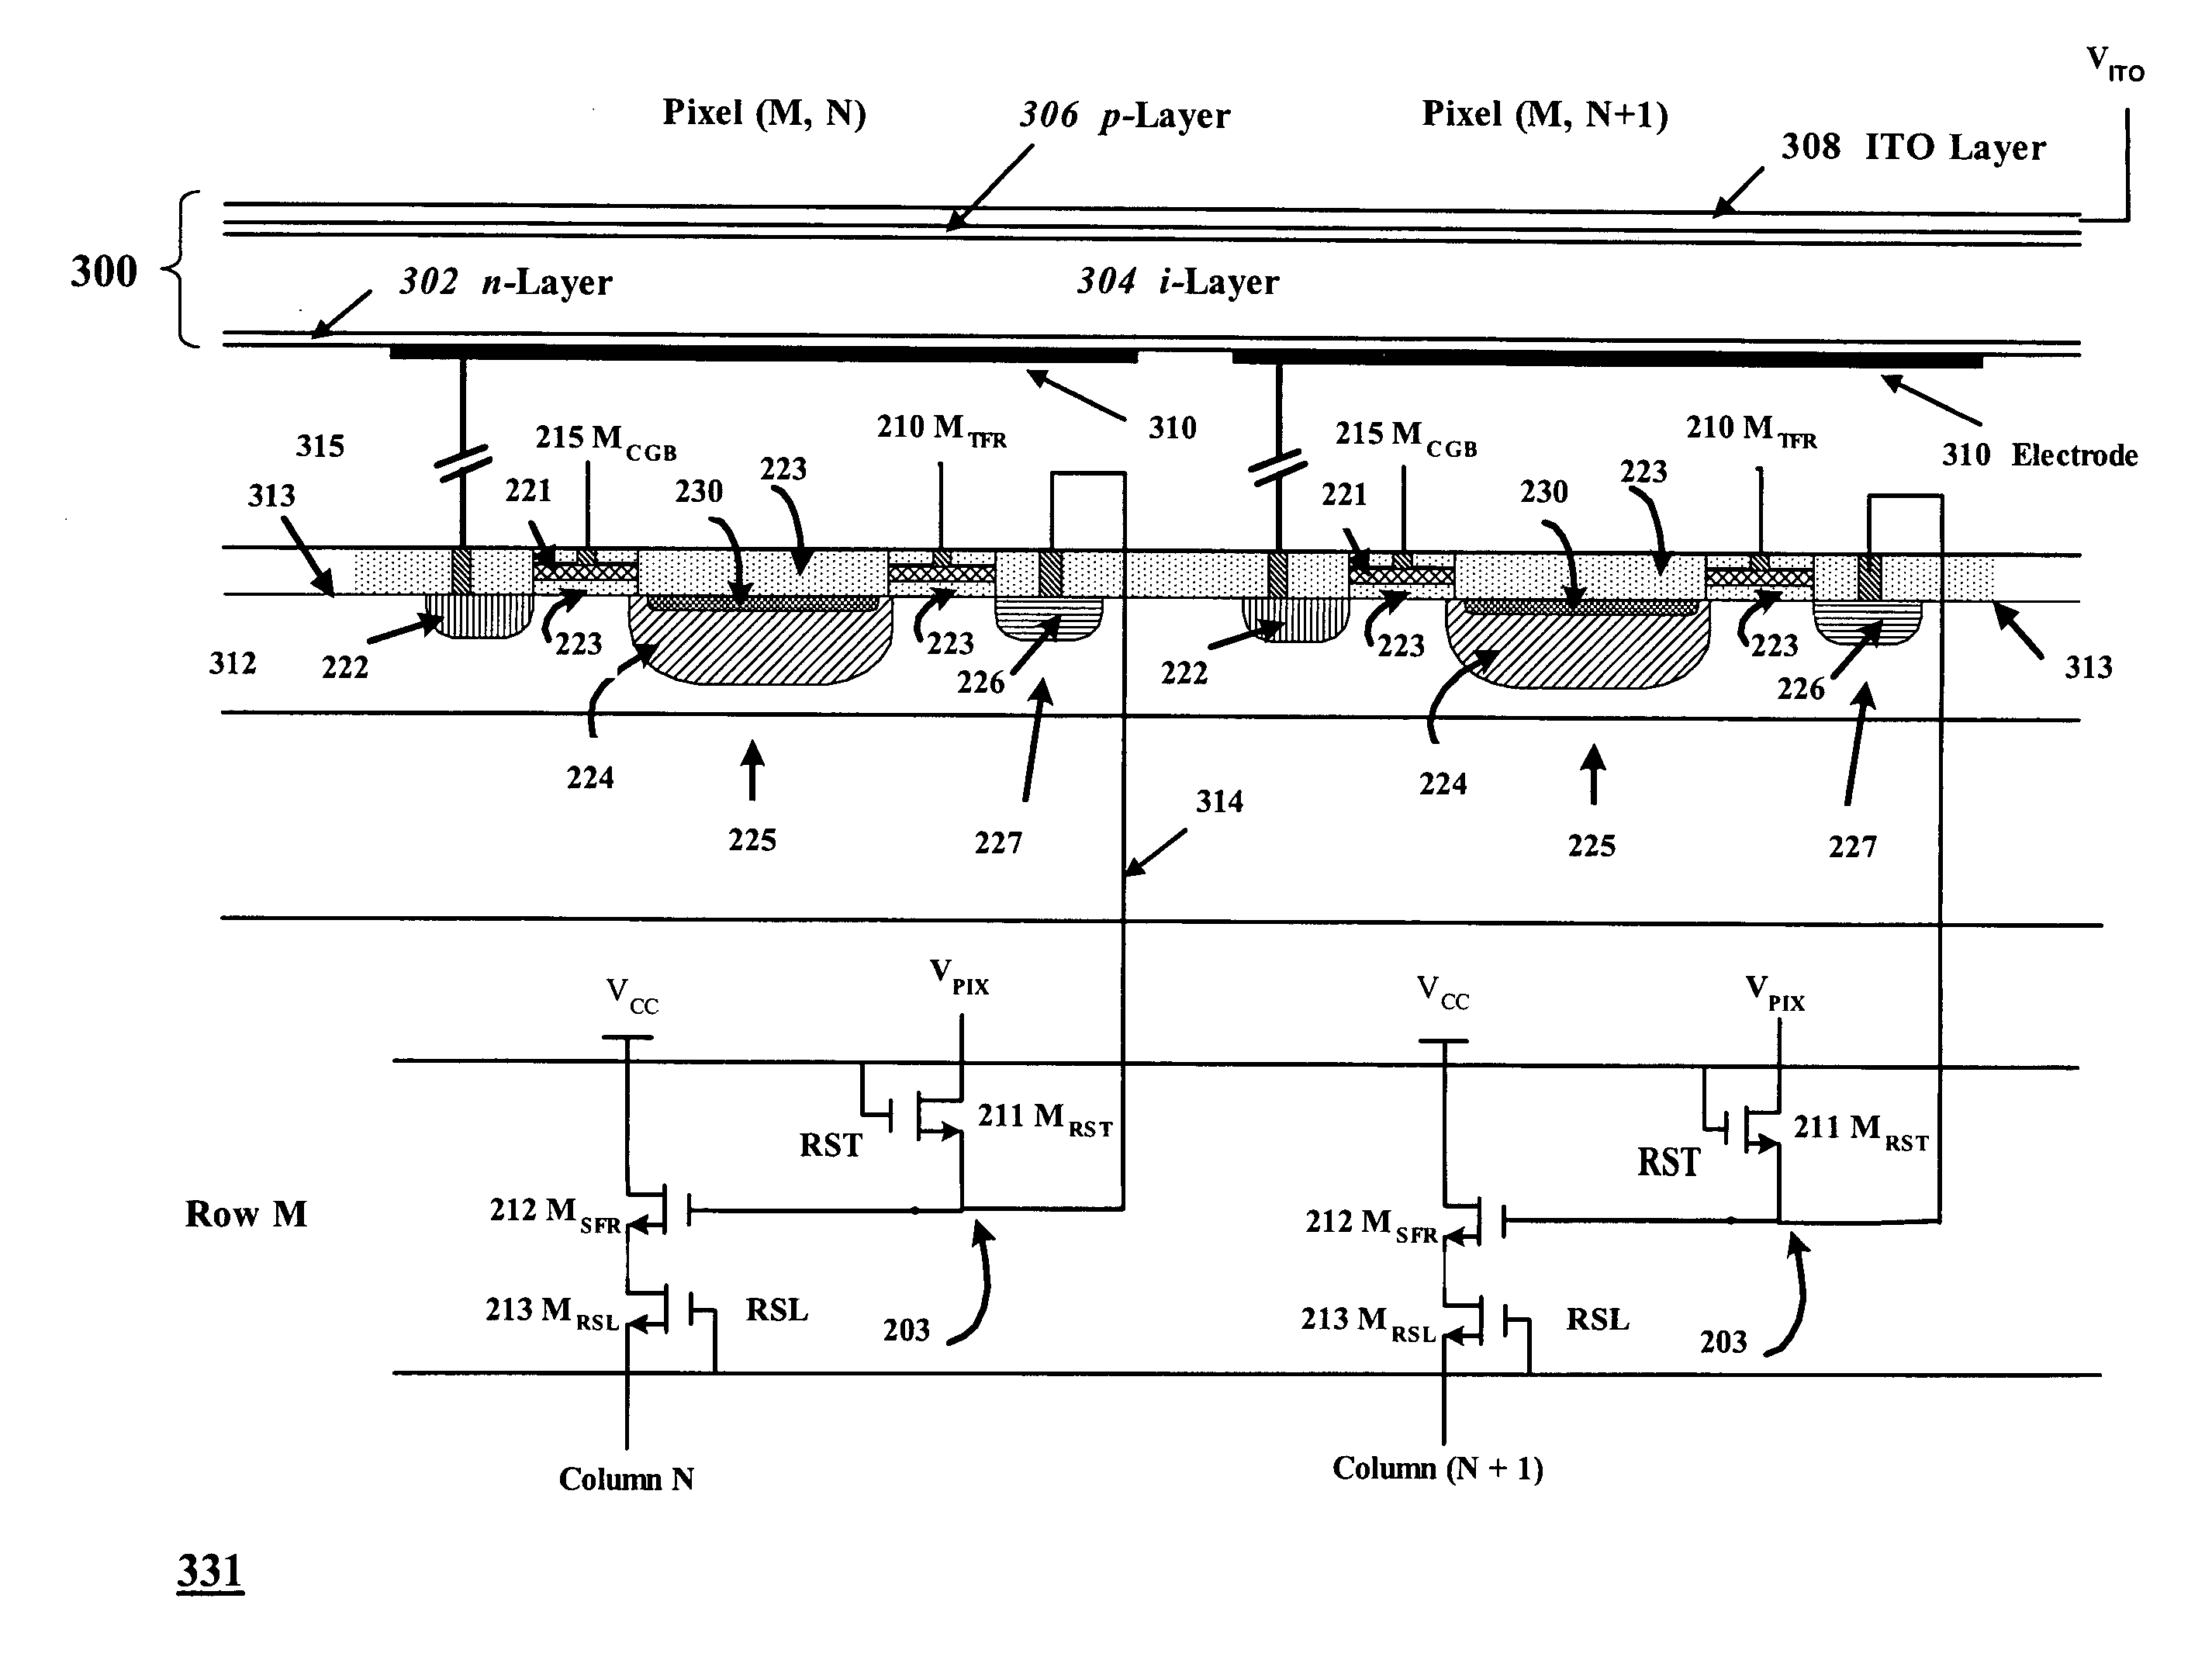 CMOS sensor with approximately equal potential photodiodes